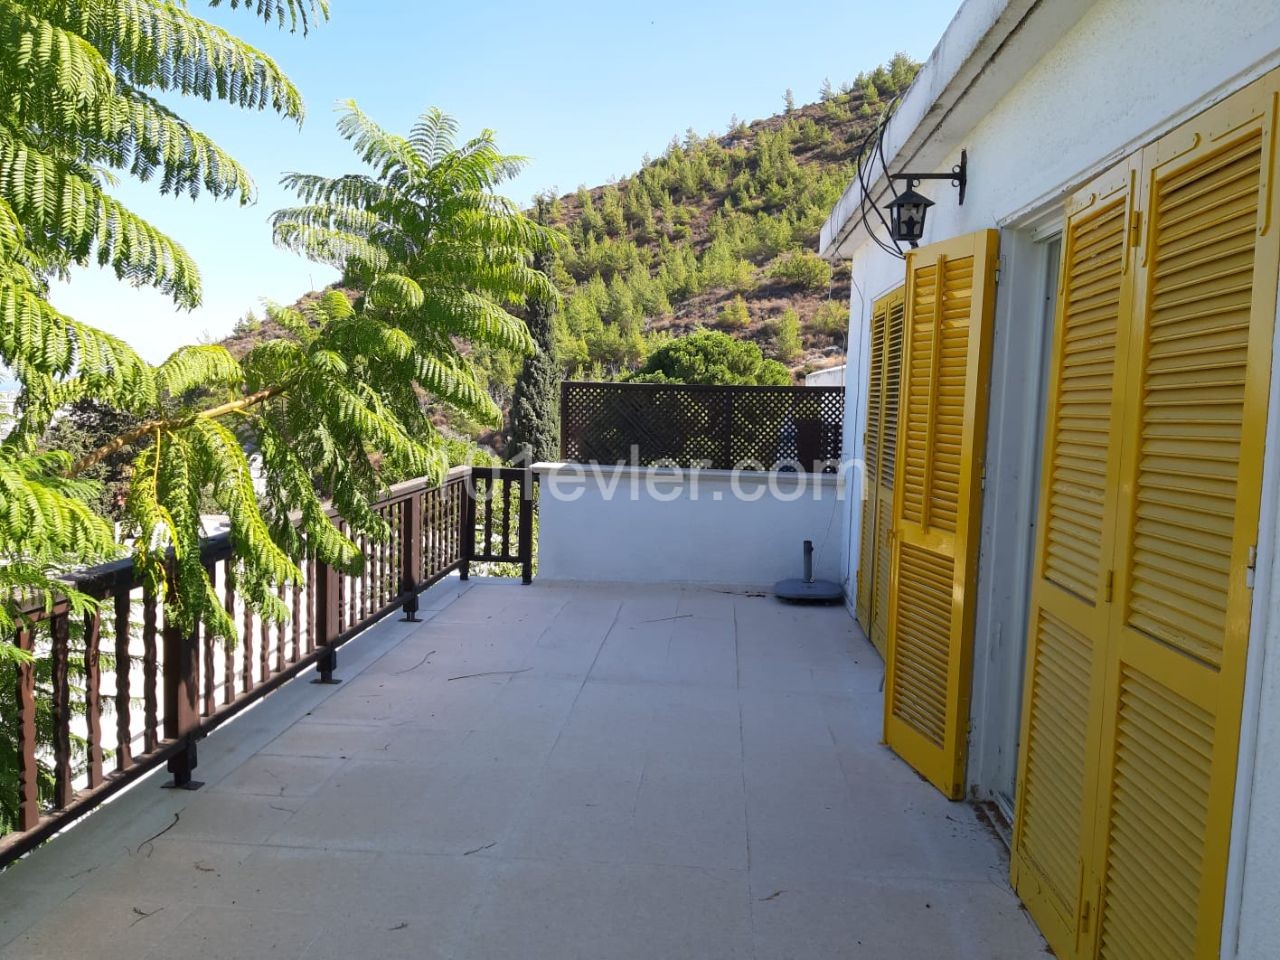 For Rent in Ambelia Village Bellapais 3 + 2 Fully Funished house ** 